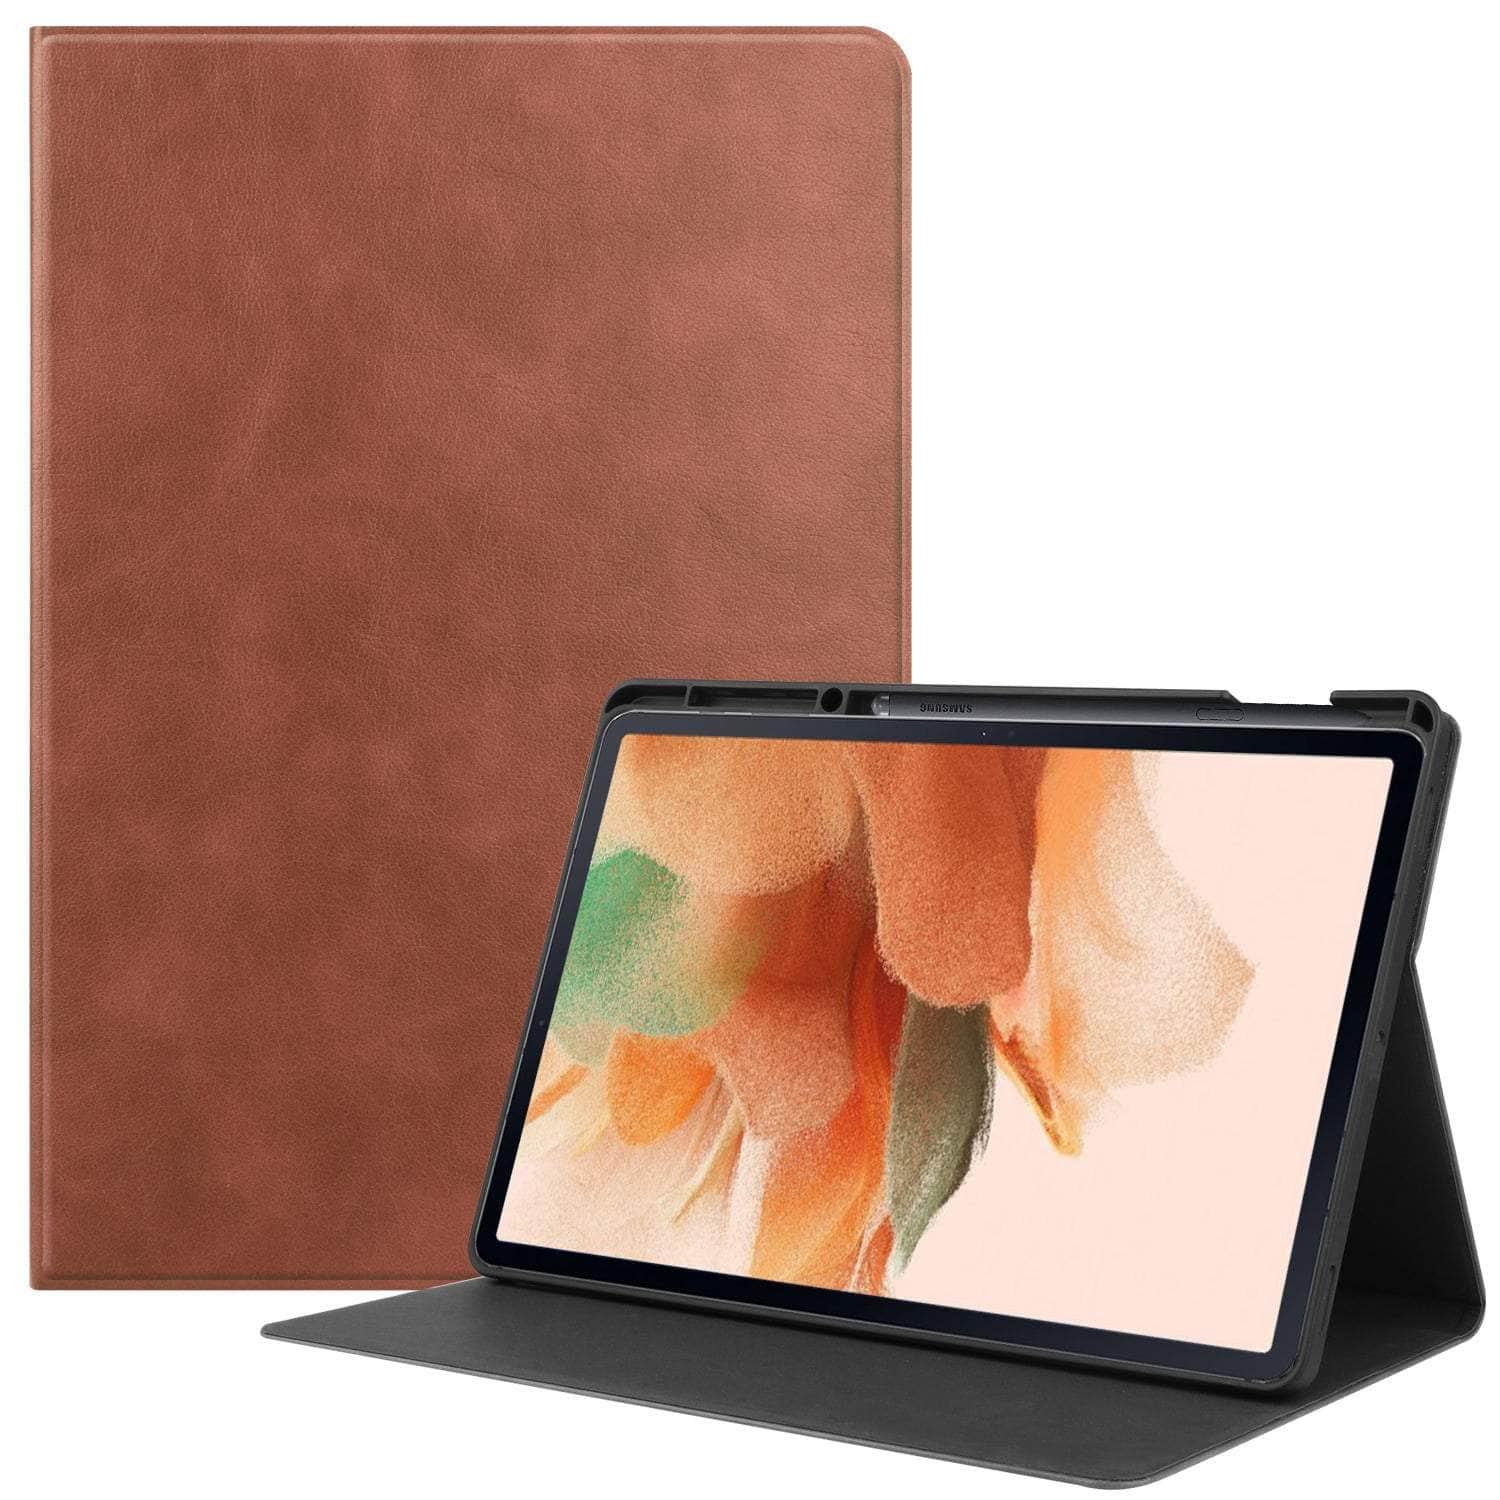 CaseBuddy Australia Casebuddy Smart Tab S8 Plus X800 Protective Magnetic Adsorption Cowhide Leather Case